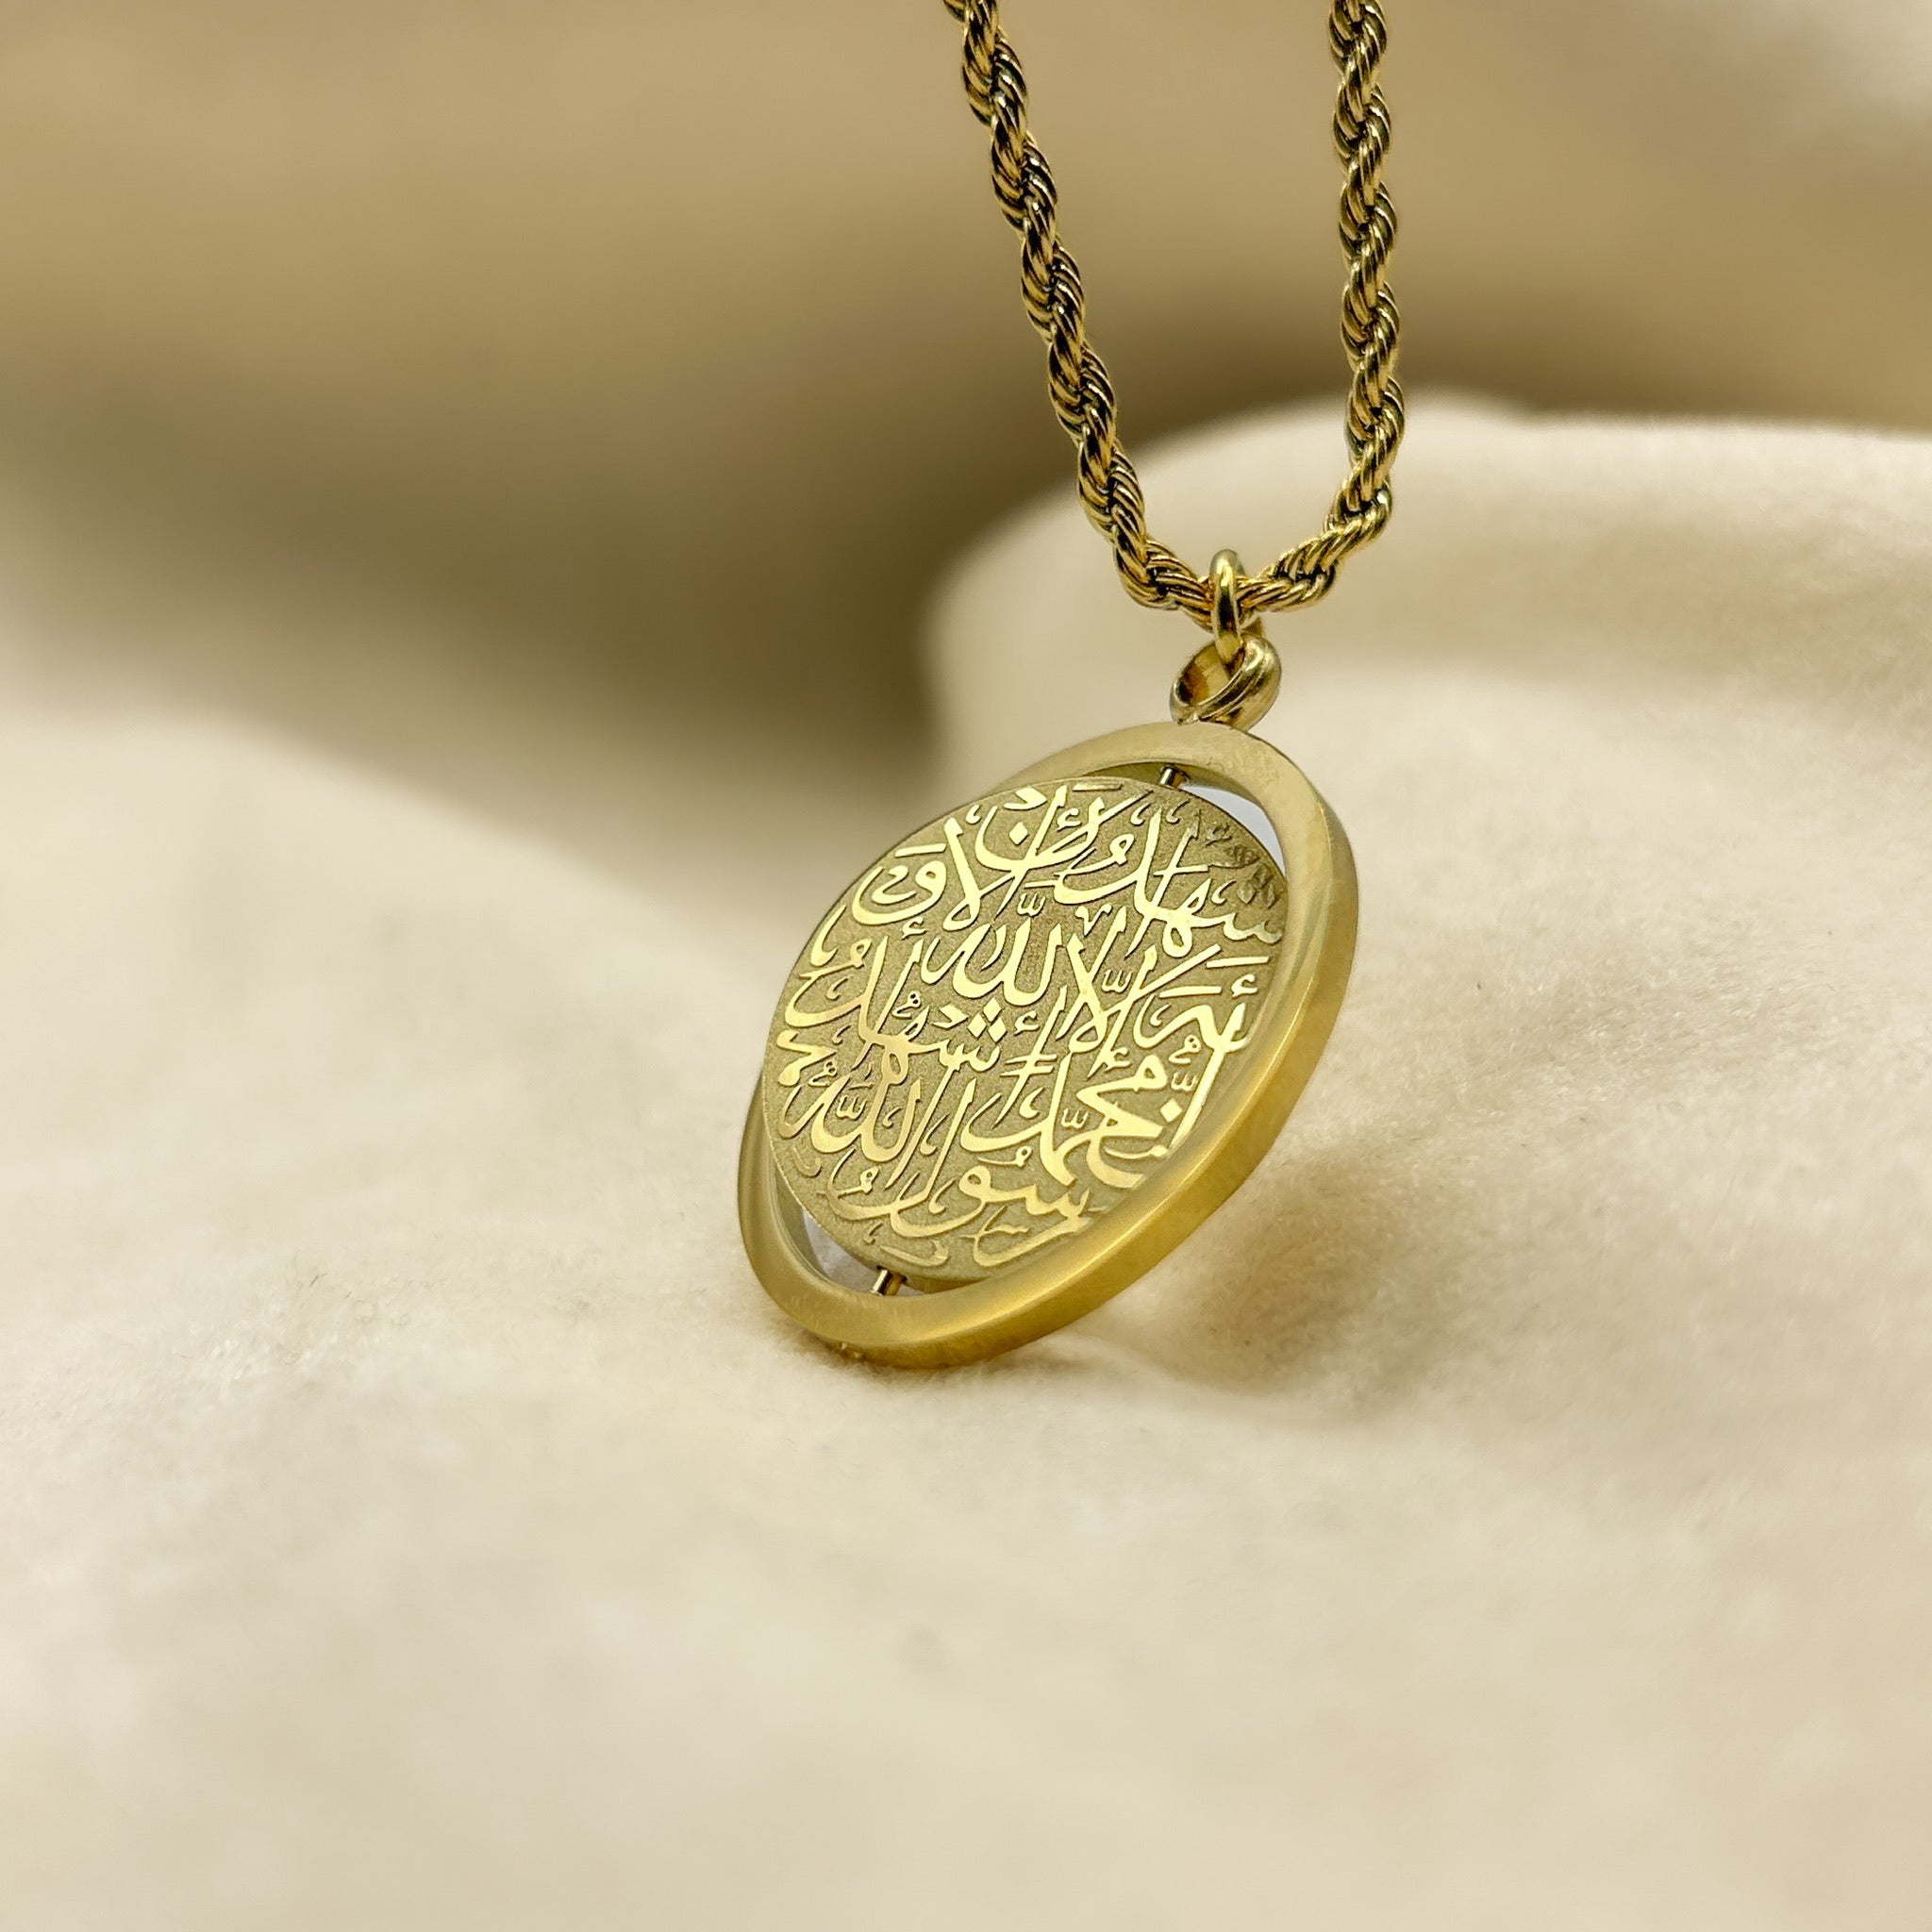 'Verily With Hardship Comes Ease' Necklace | Women